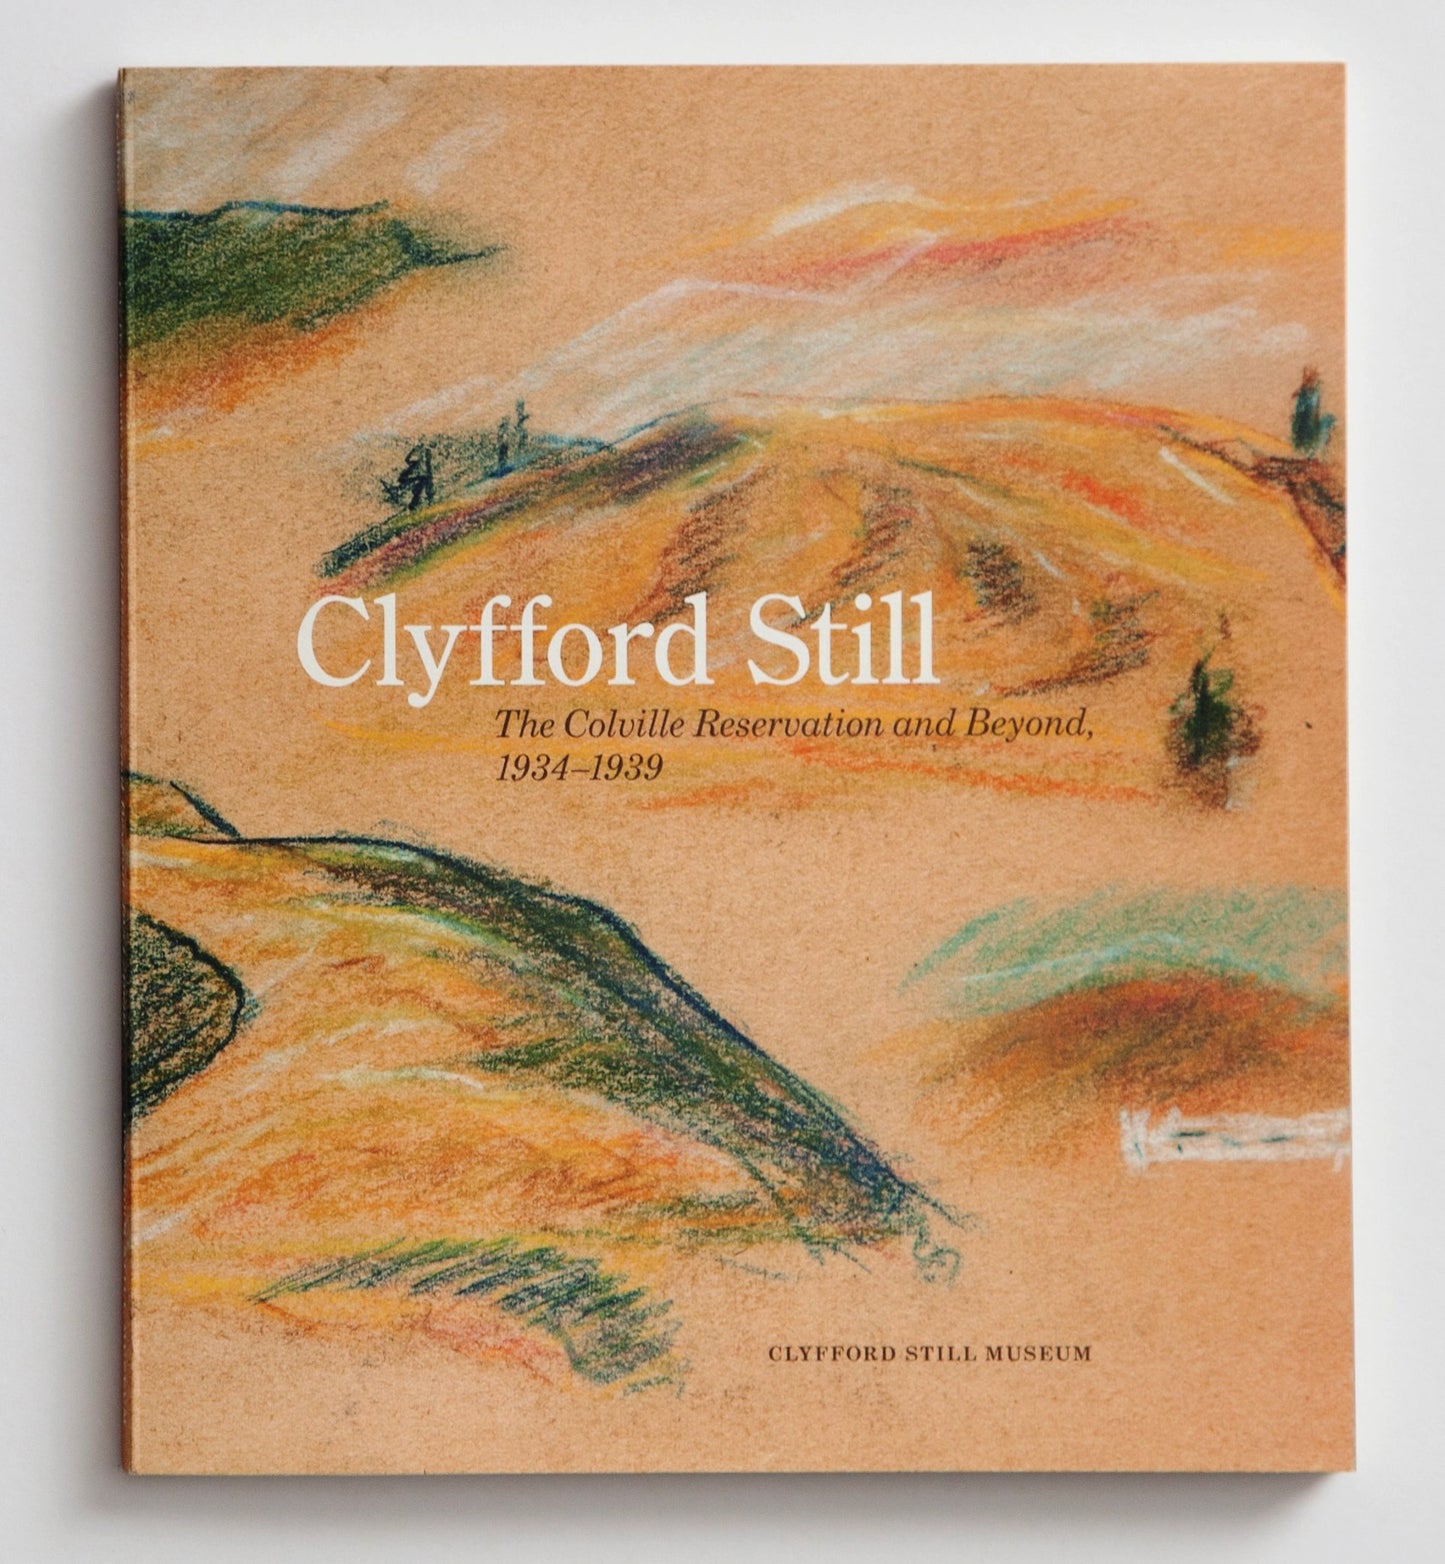 Clyfford Still: The Colville Reservation and Beyond, 1934-1939